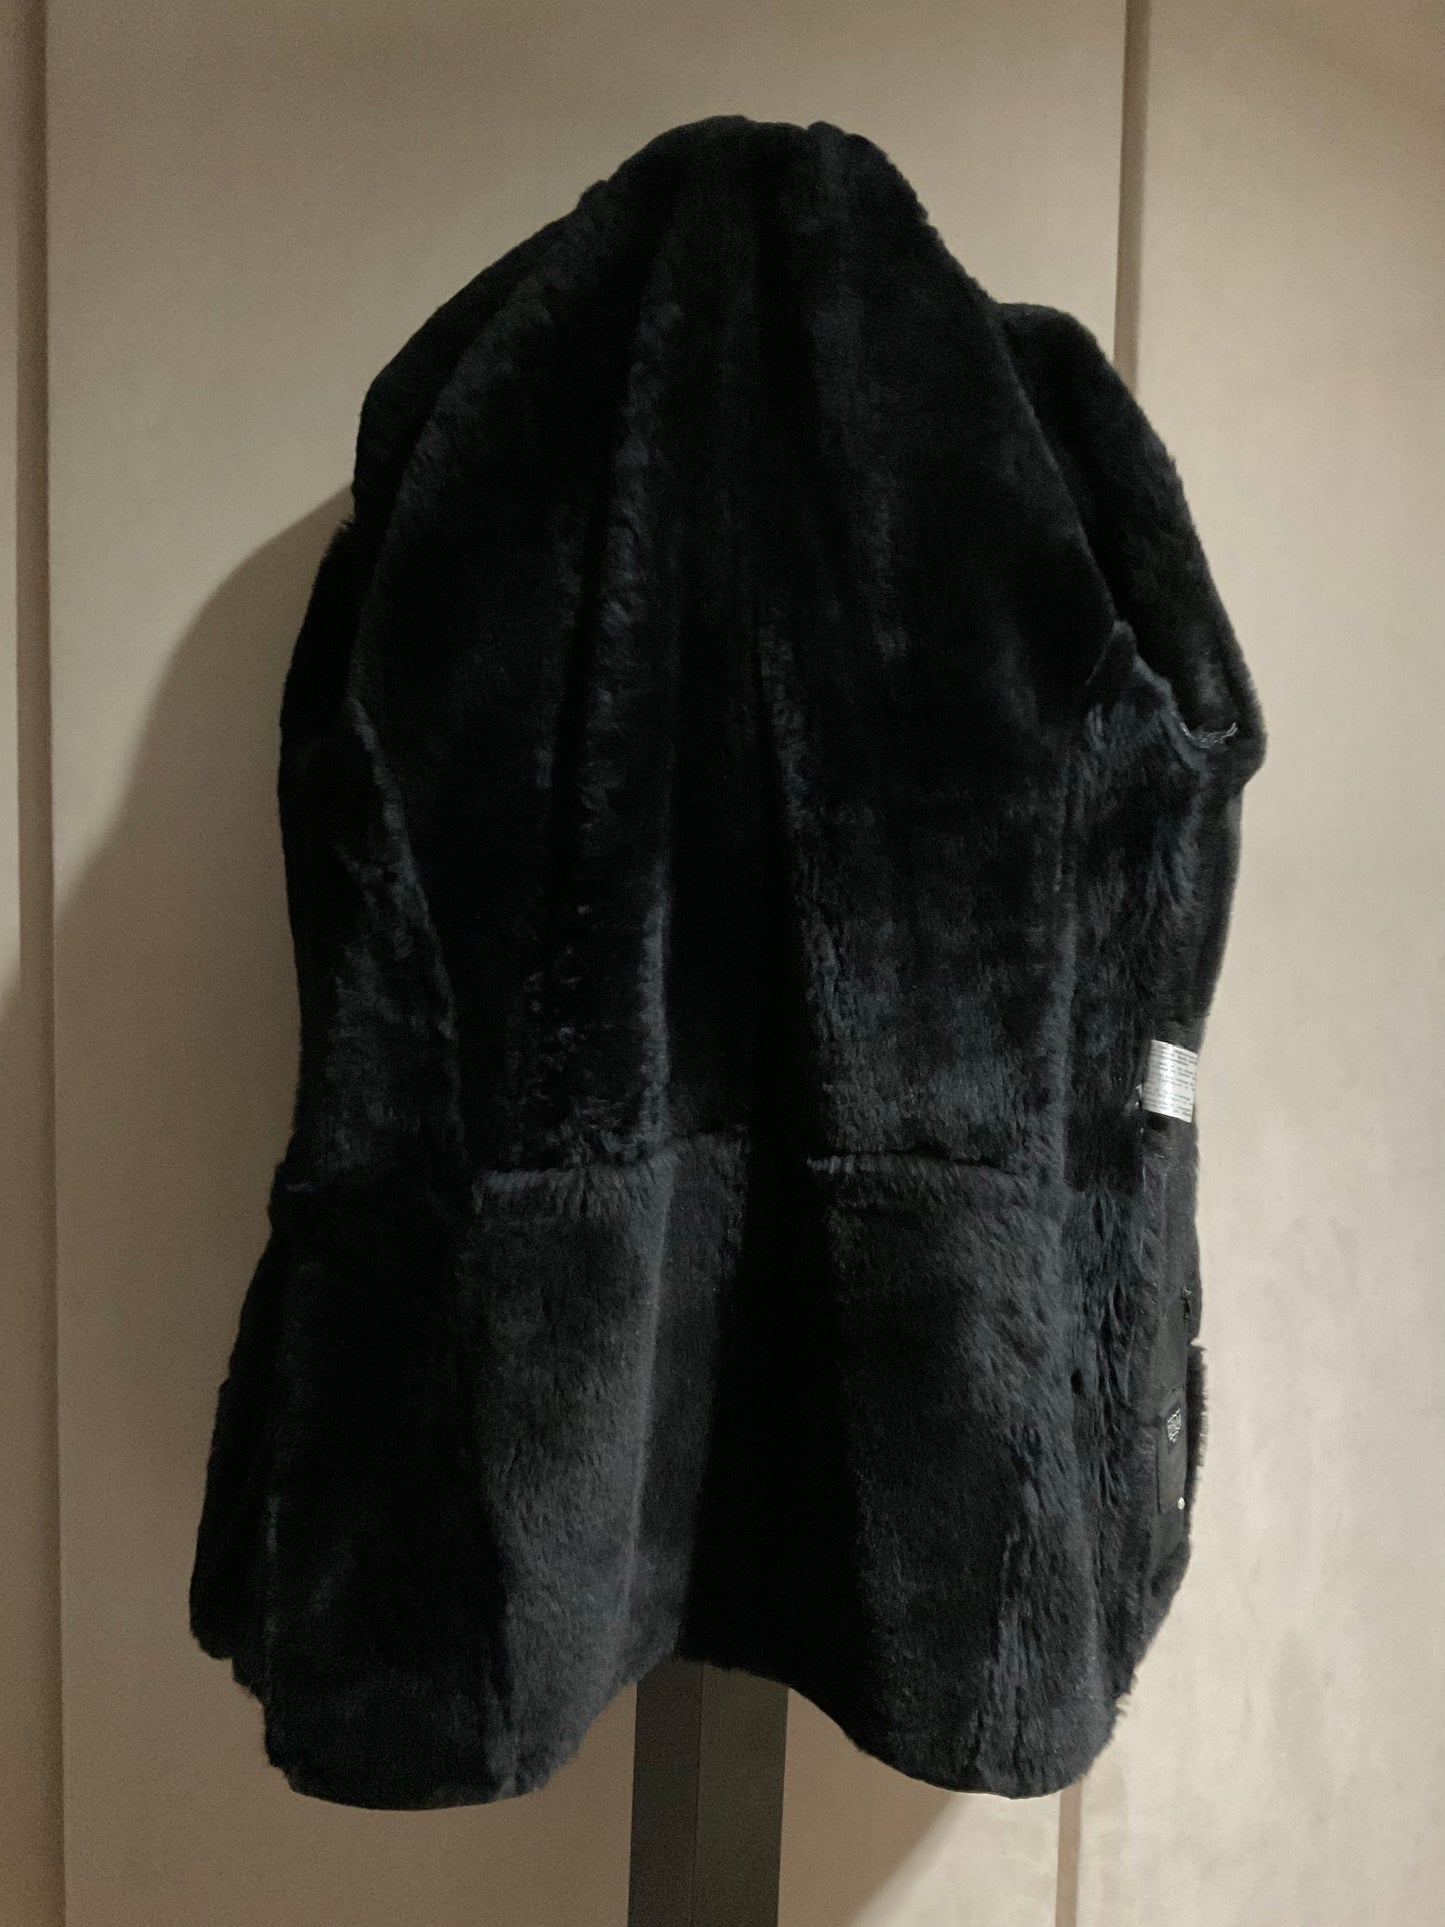 R P COAT / SHEARLING / BLACK / MID LENGHT / NEW / MEDIUM / MADE IN ITALY